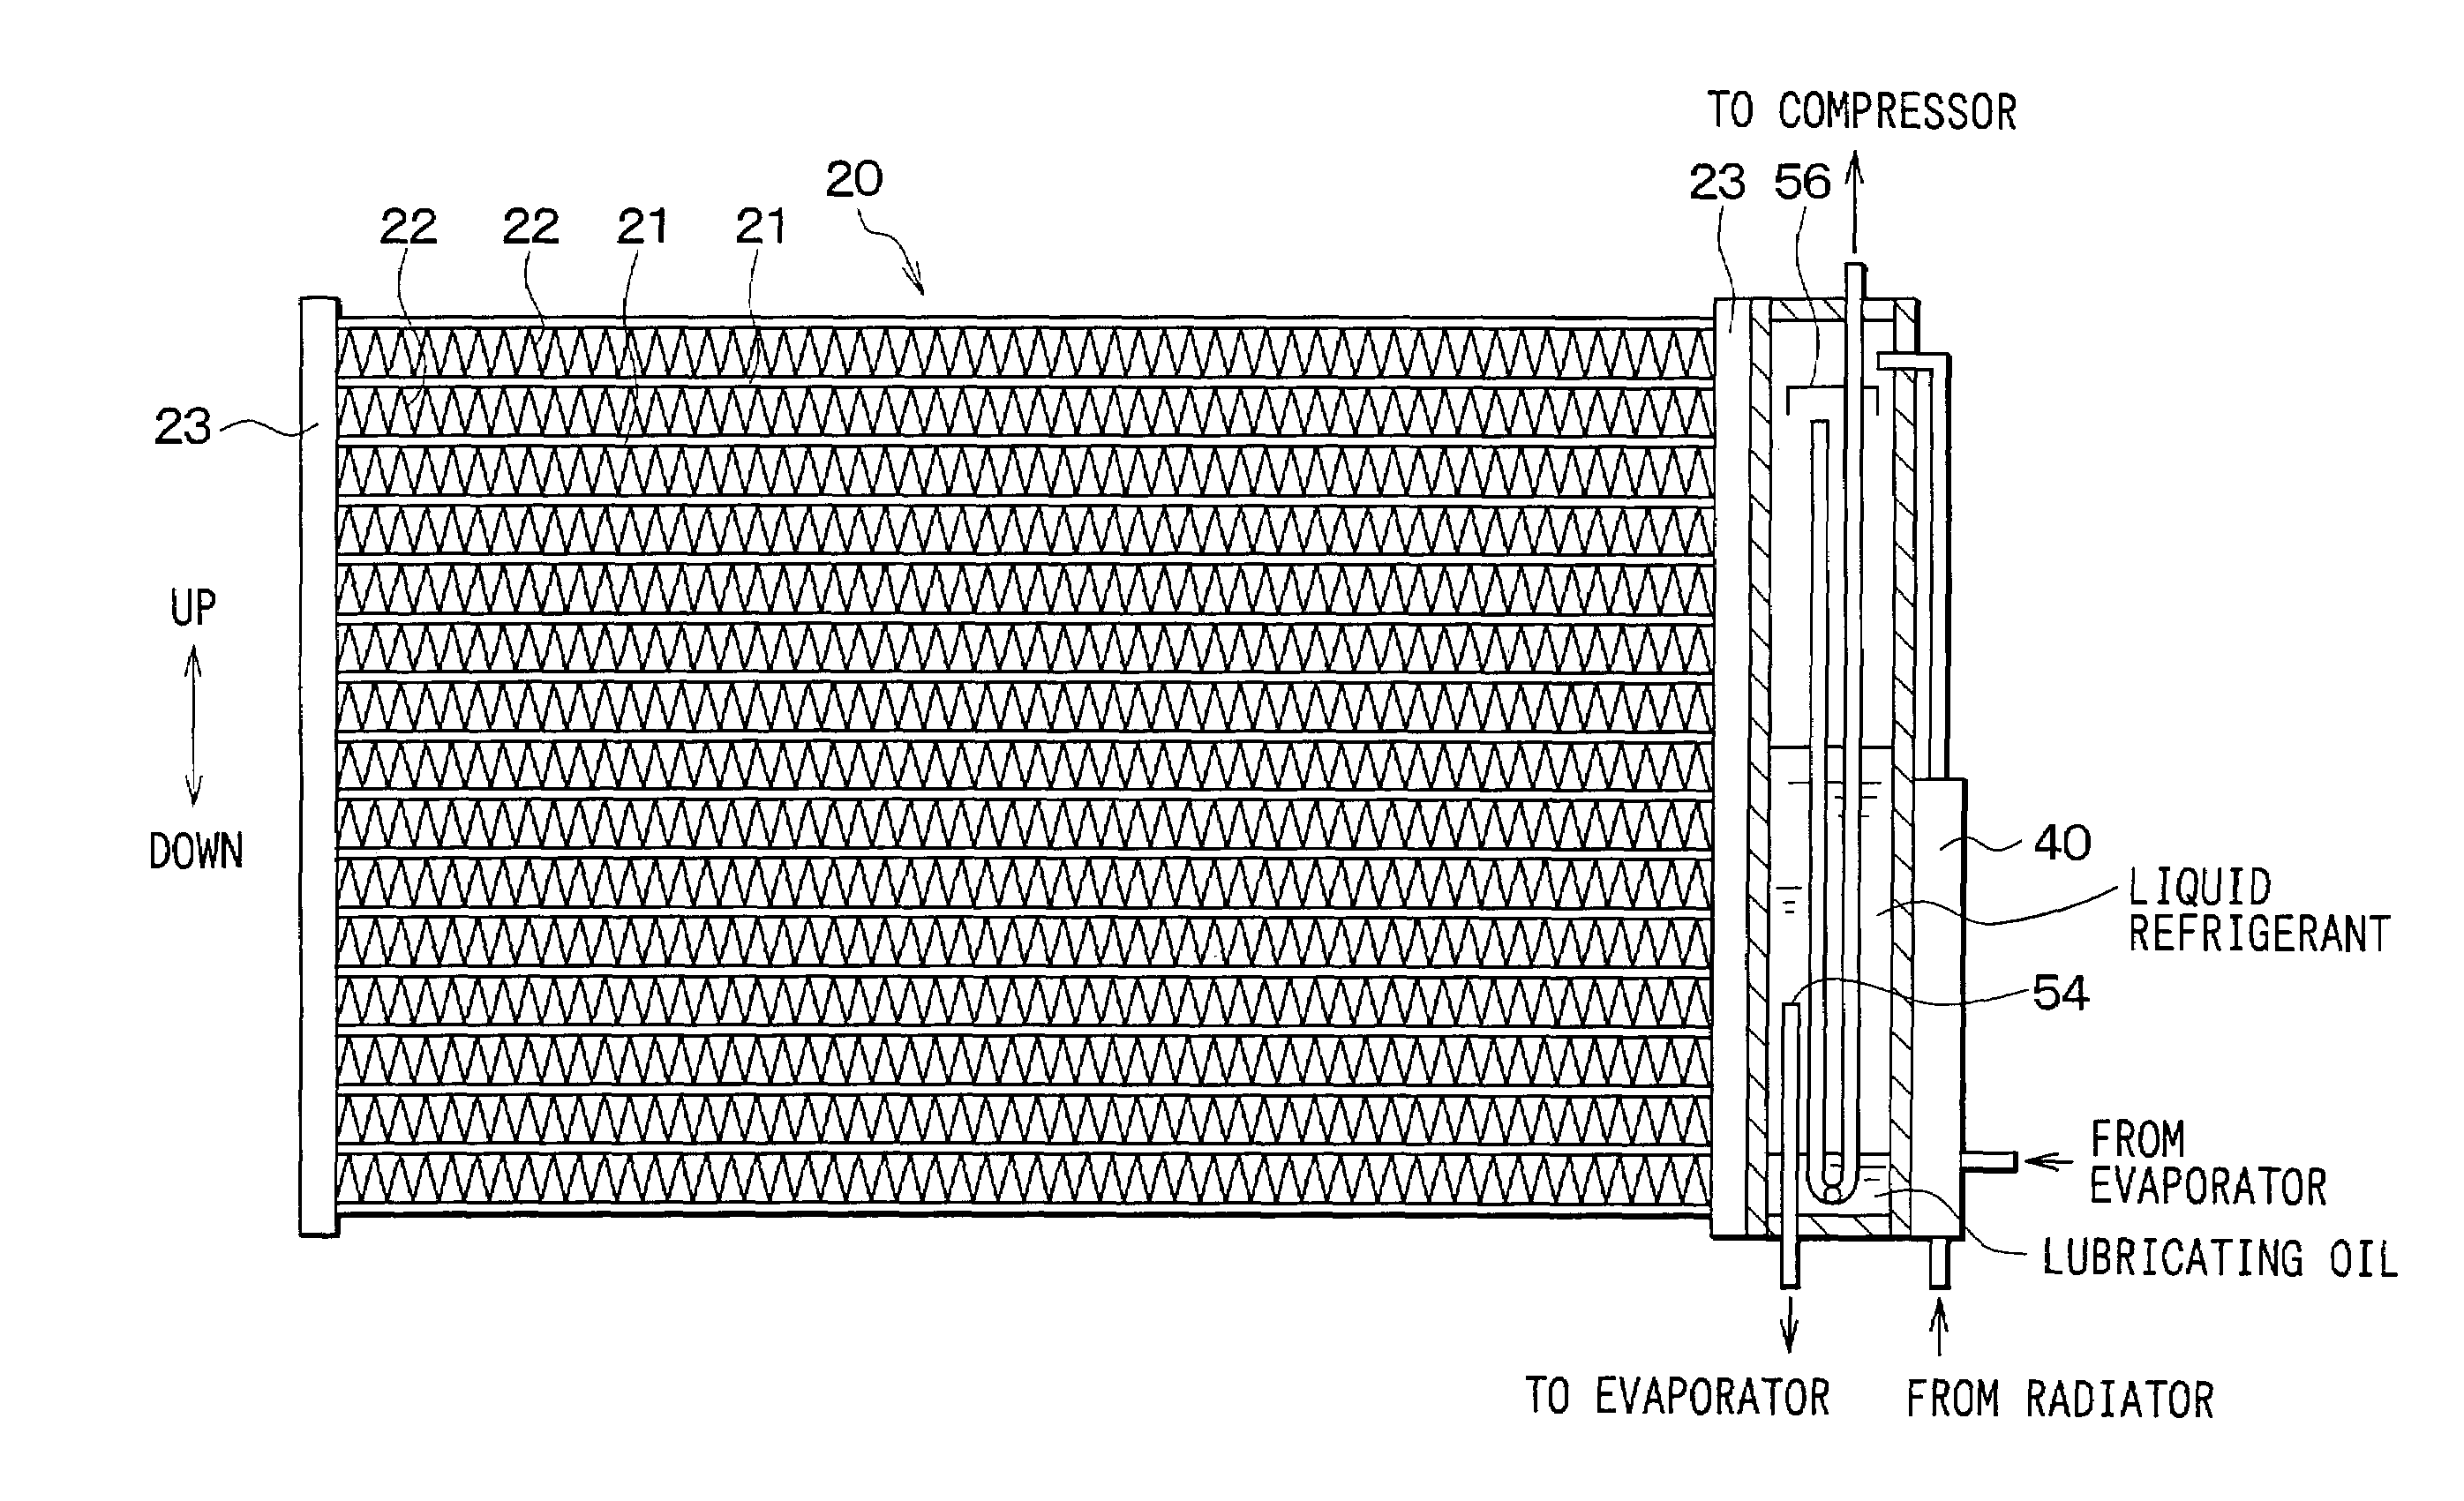 Gas-liquid separator and ejector refrigerant cycle using the same